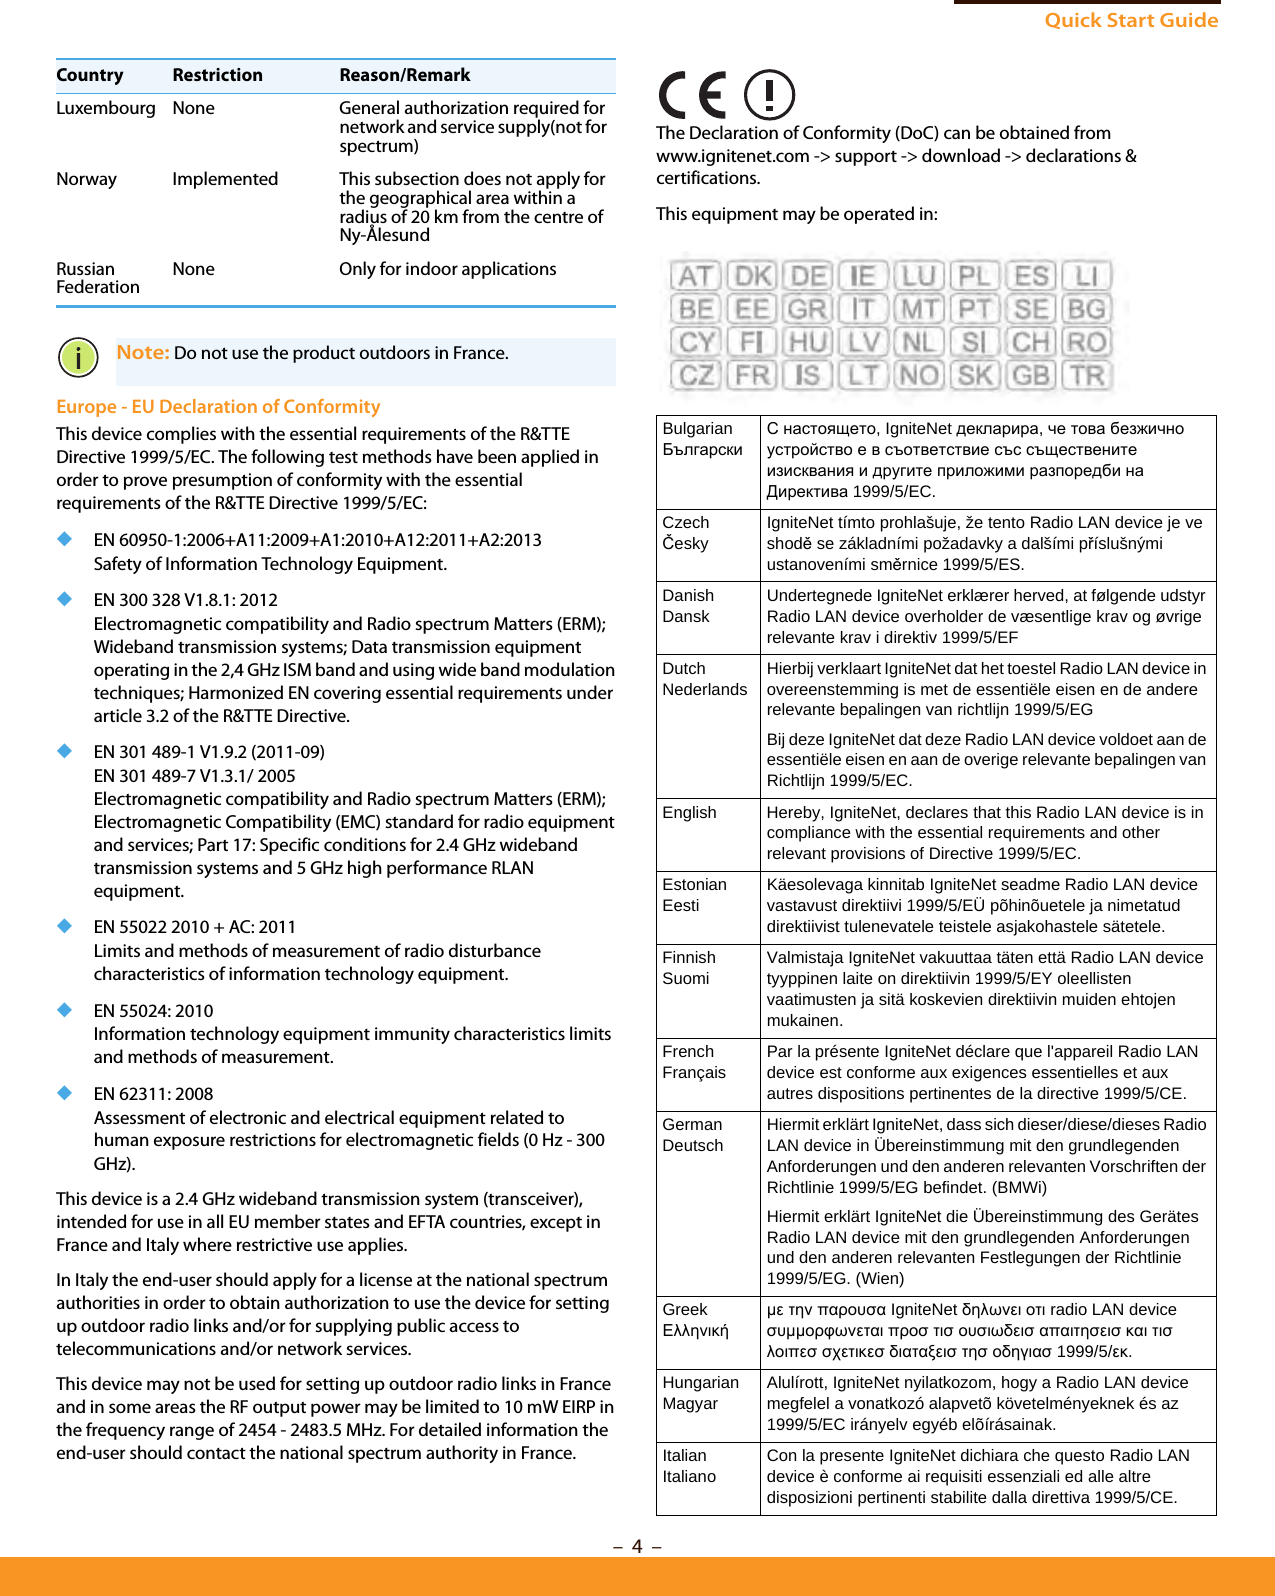 Quick Start Guide– 4  –Europe - EU Declaration of ConformityThis device complies with the essential requirements of the R&amp;TTE Directive 1999/5/EC. The following test methods have been applied in order to prove presumption of conformity with the essential requirements of the R&amp;TTE Directive 1999/5/EC:◆EN 60950-1:2006+A11:2009+A1:2010+A12:2011+A2:2013Safety of Information Technology Equipment.◆EN 300 328 V1.8.1: 2012Electromagnetic compatibility and Radio spectrum Matters (ERM); Wideband transmission systems; Data transmission equipment operating in the 2,4 GHz ISM band and using wide band modulation techniques; Harmonized EN covering essential requirements under article 3.2 of the R&amp;TTE Directive.◆EN 301 489-1 V1.9.2 (2011-09)EN 301 489-7 V1.3.1/ 2005Electromagnetic compatibility and Radio spectrum Matters (ERM); Electromagnetic Compatibility (EMC) standard for radio equipment and services; Part 17: Specific conditions for 2.4 GHz wideband transmission systems and 5 GHz high performance RLAN equipment.◆EN 55022 2010 + AC: 2011Limits and methods of measurement of radio disturbancecharacteristics of information technology equipment.◆EN 55024: 2010 Information technology equipment immunity characteristics limits and methods of measurement.◆EN 62311: 2008Assessment of electronic and electrical equipment related to human exposure restrictions for electromagnetic fields (0 Hz - 300 GHz).This device is a 2.4 GHz wideband transmission system (transceiver), intended for use in all EU member states and EFTA countries, except in France and Italy where restrictive use applies.In Italy the end-user should apply for a license at the national spectrum authorities in order to obtain authorization to use the device for setting up outdoor radio links and/or for supplying public access to telecommunications and/or network services.This device may not be used for setting up outdoor radio links in France and in some areas the RF output power may be limited to 10 mW EIRP in the frequency range of 2454 - 2483.5 MHz. For detailed information the end-user should contact the national spectrum authority in France.The Declaration of Conformity (DoC) can be obtained from www.ignitenet.com -&gt; support -&gt; download -&gt; declarations &amp; certifications.This equipment may be operated in:Luxembourg None General authorization required for network and service supply(not for spectrum)Norway Implemented This subsection does not apply for the geographical area within a radius of 20 km from the centre of Ny-ÅlesundRussian Federation None Only for indoor applicationsNote: Do not use the product outdoors in France.Country Restriction Reason/RemarkBulgarianБългарскиС настоящето, IgniteNet декларира, че това безжично устройство е в съответствие със съществените изисквания и другите приложими разпоредби на Директива 1999/5/EC.CzechČeskyIgniteNet tímto prohlašuje, že tento Radio LAN device je ve shodě se základními požadavky a dalšími příslušnými ustanoveními směrnice 1999/5/ES.DanishDanskUndertegnede IgniteNet erklærer herved, at følgende udstyr Radio LAN device overholder de væsentlige krav og øvrige relevante krav i direktiv 1999/5/EFDutchNederlandsHierbij verklaart IgniteNet dat het toestel Radio LAN device in overeenstemming is met de essentiële eisen en de andere relevante bepalingen van richtlijn 1999/5/EGBij deze IgniteNet dat deze Radio LAN device voldoet aan de essentiële eisen en aan de overige relevante bepalingen van Richtlijn 1999/5/EC.English Hereby, IgniteNet, declares that this Radio LAN device is in compliance with the essential requirements and other relevant provisions of Directive 1999/5/EC.EstonianEestiKäesolevaga kinnitab IgniteNet seadme Radio LAN device vastavust direktiivi 1999/5/EÜ põhinõuetele ja nimetatud direktiivist tulenevatele teistele asjakohastele sätetele.FinnishSuomiValmistaja IgniteNet vakuuttaa täten että Radio LAN device tyyppinen laite on direktiivin 1999/5/EY oleellisten vaatimusten ja sitä koskevien direktiivin muiden ehtojen mukainen.FrenchFrançaisPar la présente IgniteNet déclare que l&apos;appareil Radio LAN device est conforme aux exigences essentielles et aux autres dispositions pertinentes de la directive 1999/5/CE.GermanDeutschHiermit erklärt IgniteNet, dass sich dieser/diese/dieses Radio LAN device in Übereinstimmung mit den grundlegenden Anforderungen und den anderen relevanten Vorschriften der Richtlinie 1999/5/EG befindet. (BMWi)Hiermit erklärt IgniteNet die Übereinstimmung des Gerätes Radio LAN device mit den grundlegenden Anforderungen und den anderen relevanten Festlegungen der Richtlinie 1999/5/EG. (Wien)GreekΕλληνικήμε την παρουσα IgniteNet δηλωνει οτι radio LAN device συμμορφωνεται προσ τισ ουσιωδεισ απαιτησεισ και τισ λοιπεσ σχετικεσ διαταξεισ τησ οδηγιασ 1999/5/εκ.HungarianMagyarAlulírott, IgniteNet nyilatkozom, hogy a Radio LAN device megfelel a vonatkozó alapvetõ követelményeknek és az 1999/5/EC irányelv egyéb elõírásainak.ItalianItalianoCon la presente IgniteNet dichiara che questo Radio LAN device è conforme ai requisiti essenziali ed alle altre disposizioni pertinenti stabilite dalla direttiva 1999/5/CE.